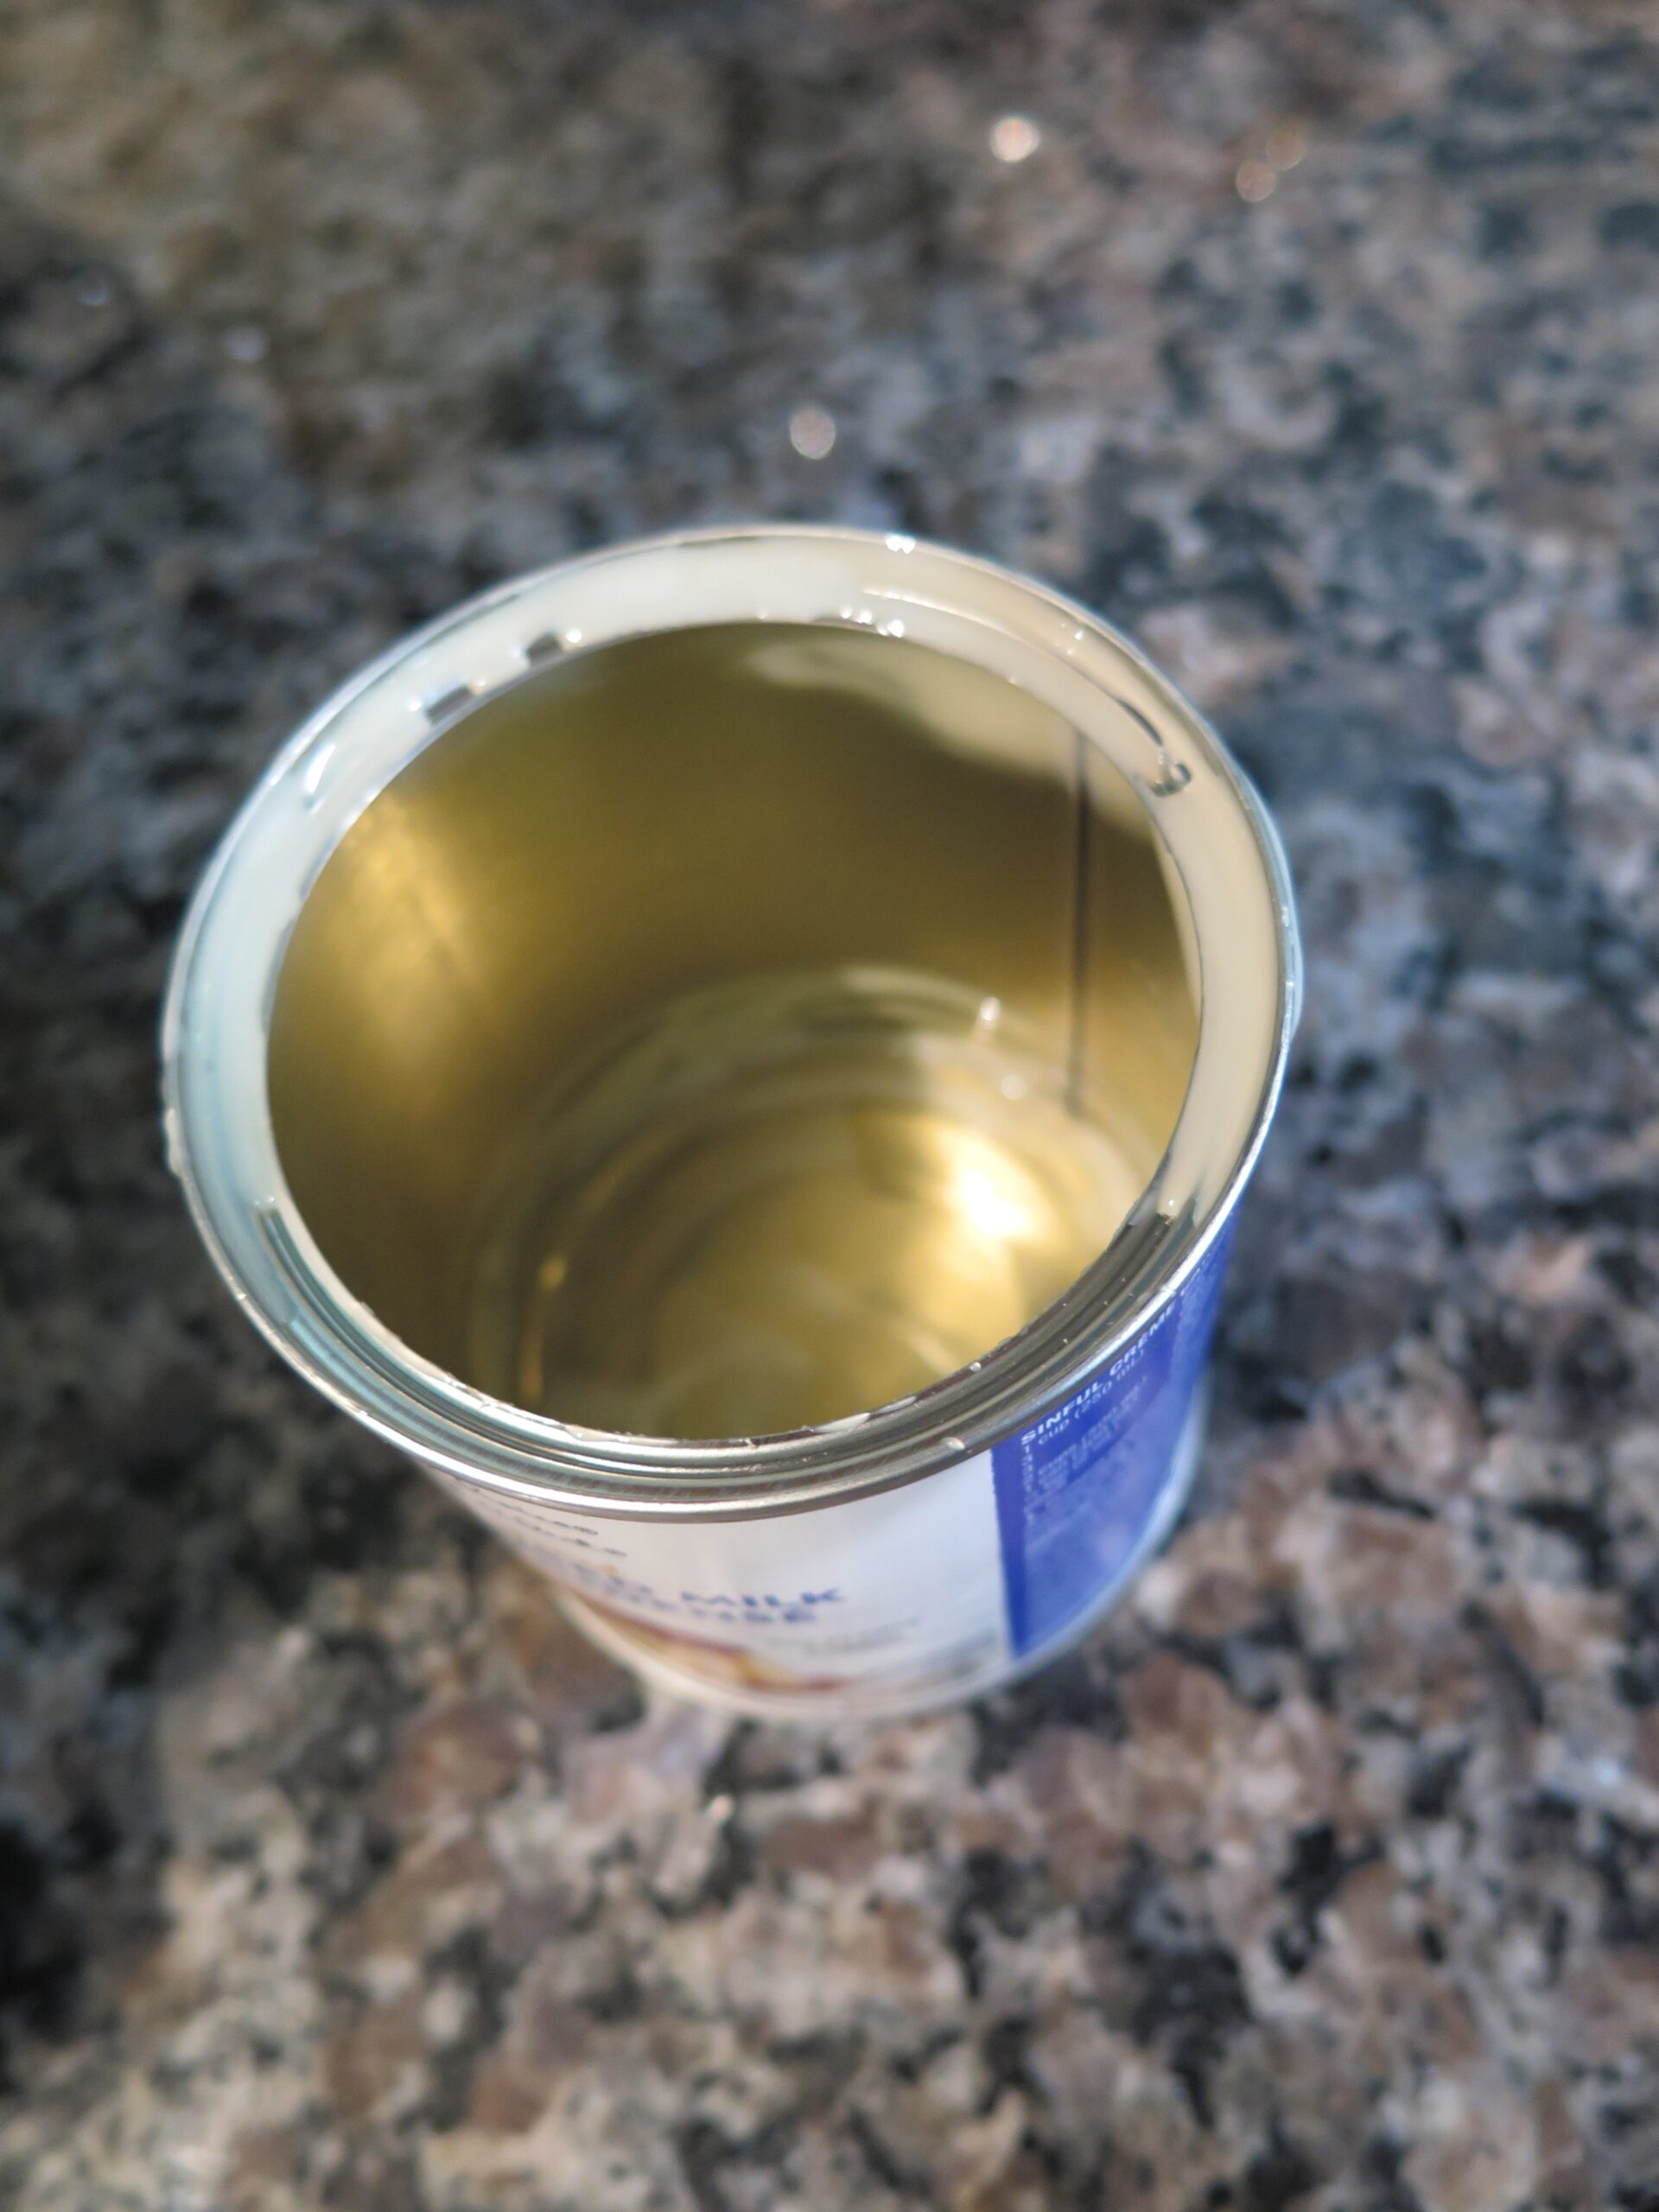 empty can of sweetened condensed milk